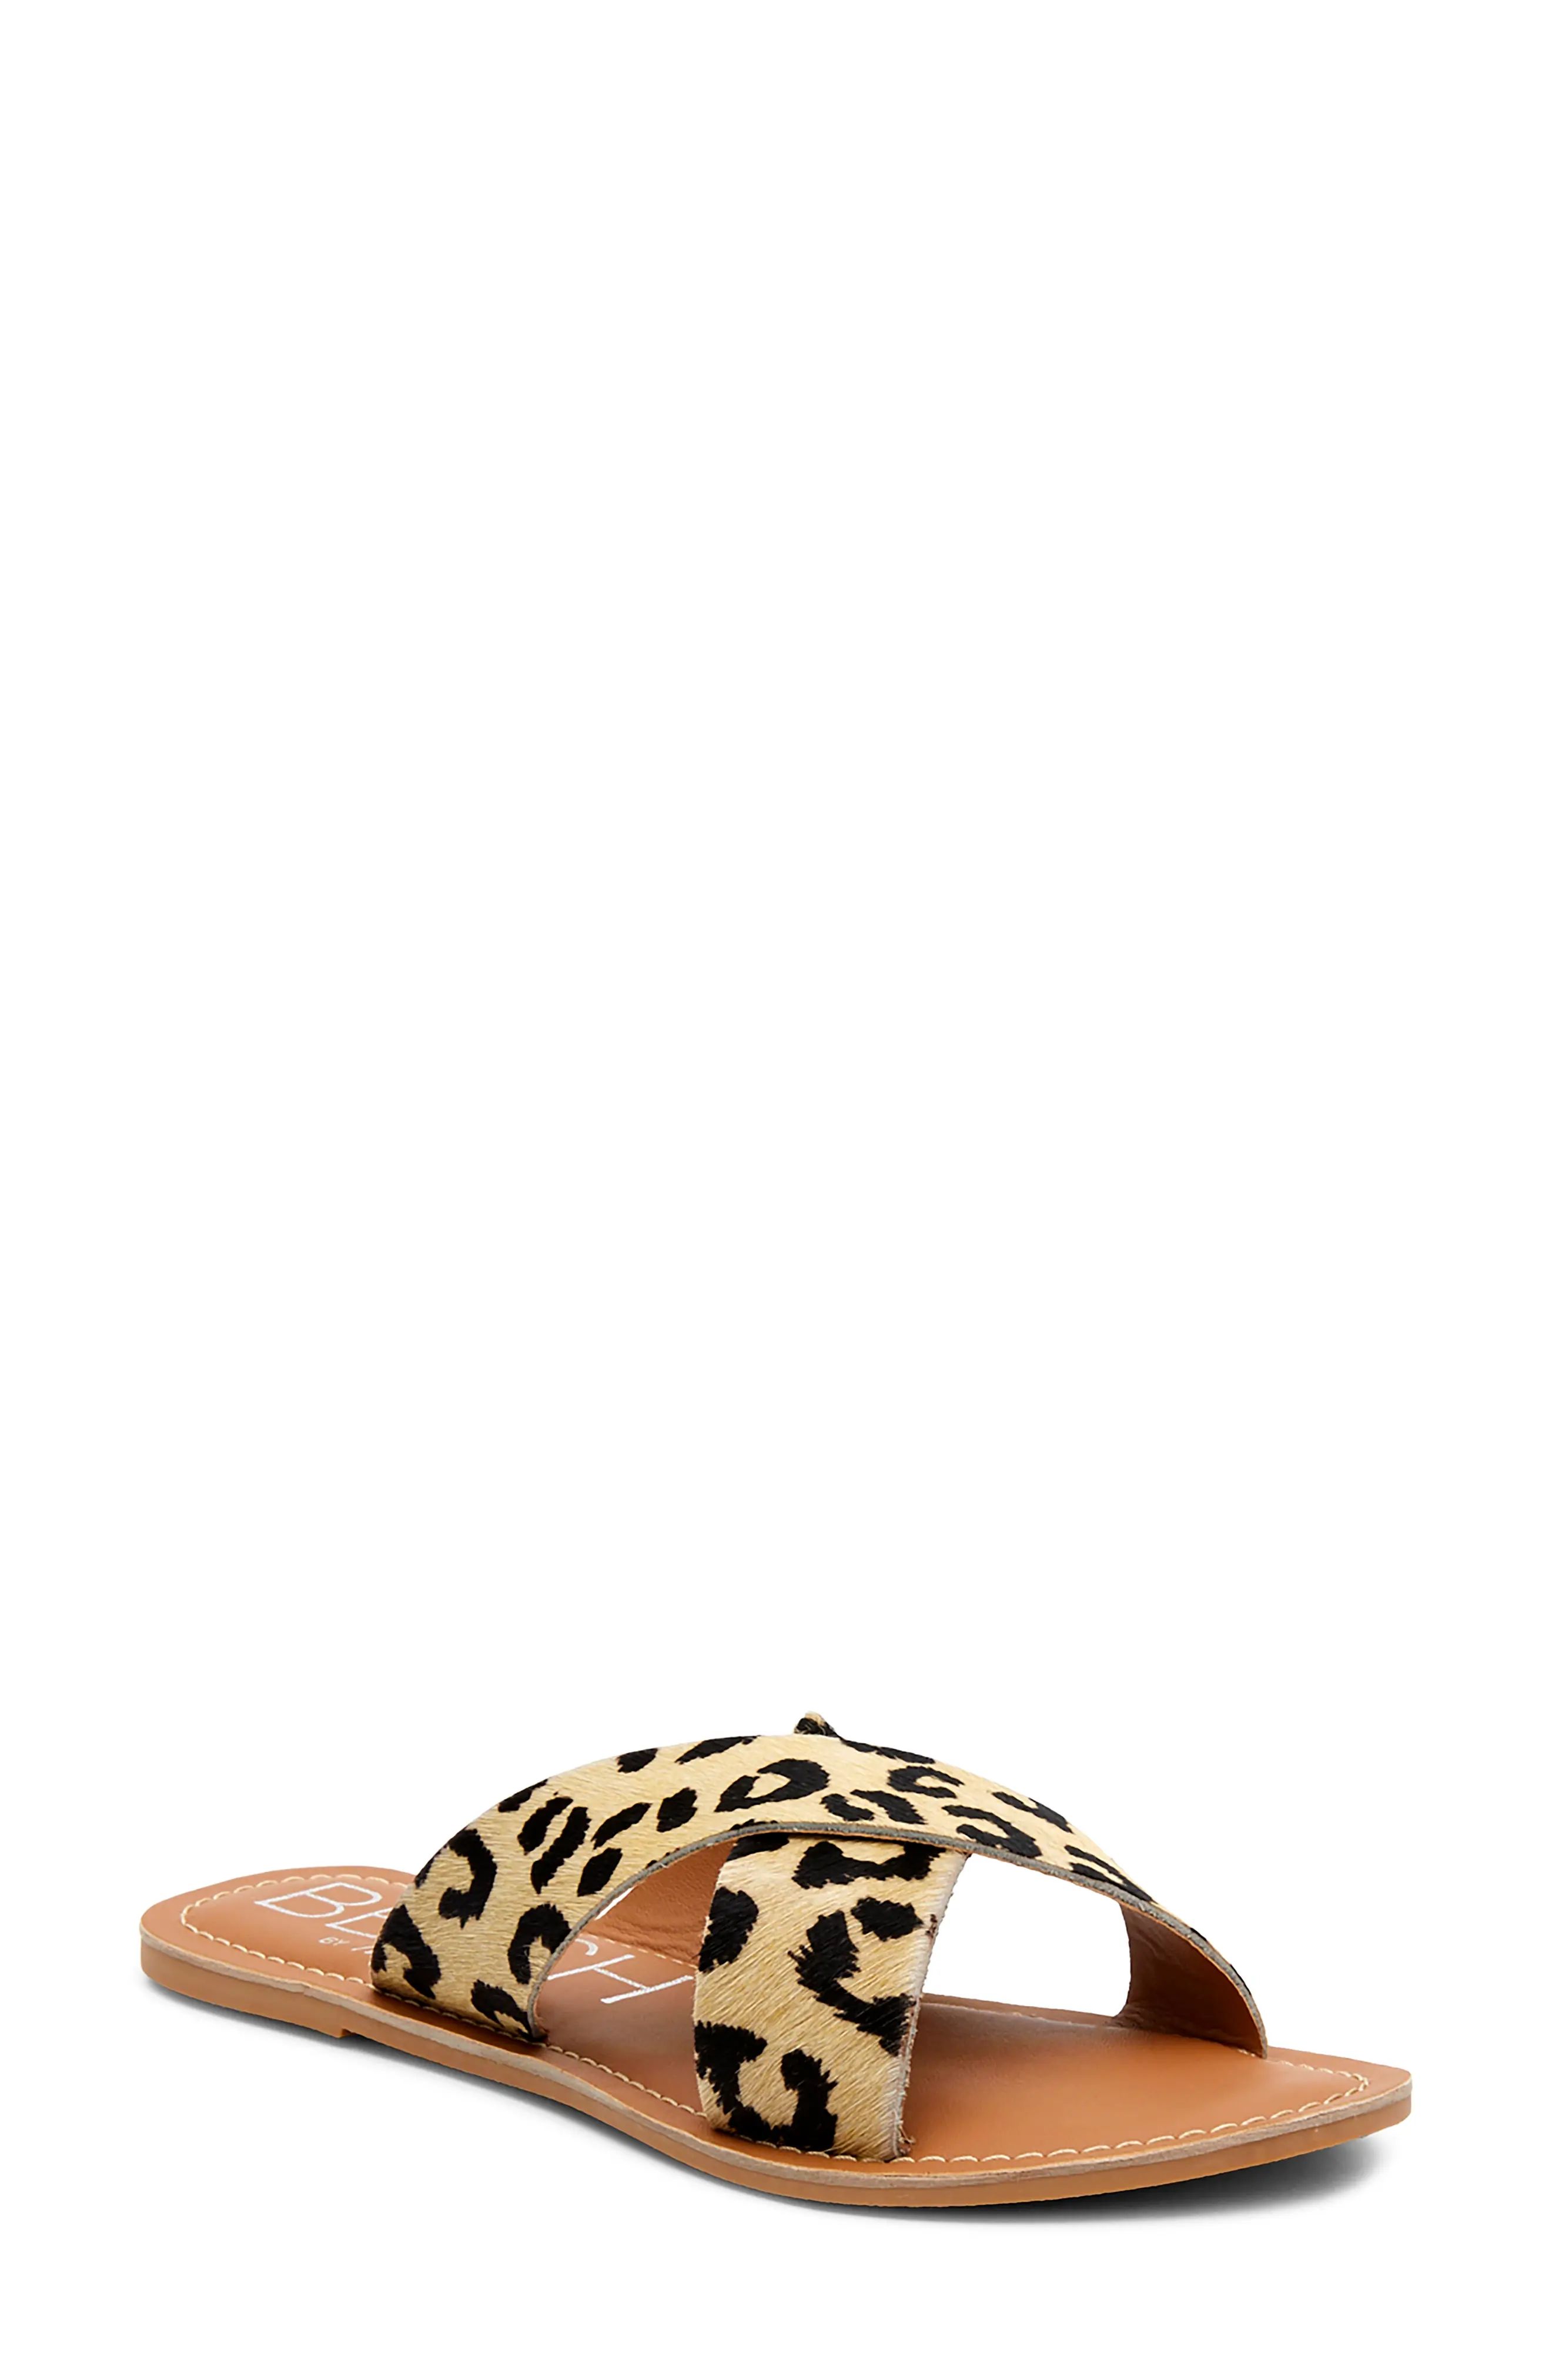 Coconuts by Matisse Pebble Slide Sandal in White Leopard Calf Hair at Nordstrom, Size 6 | Nordstrom